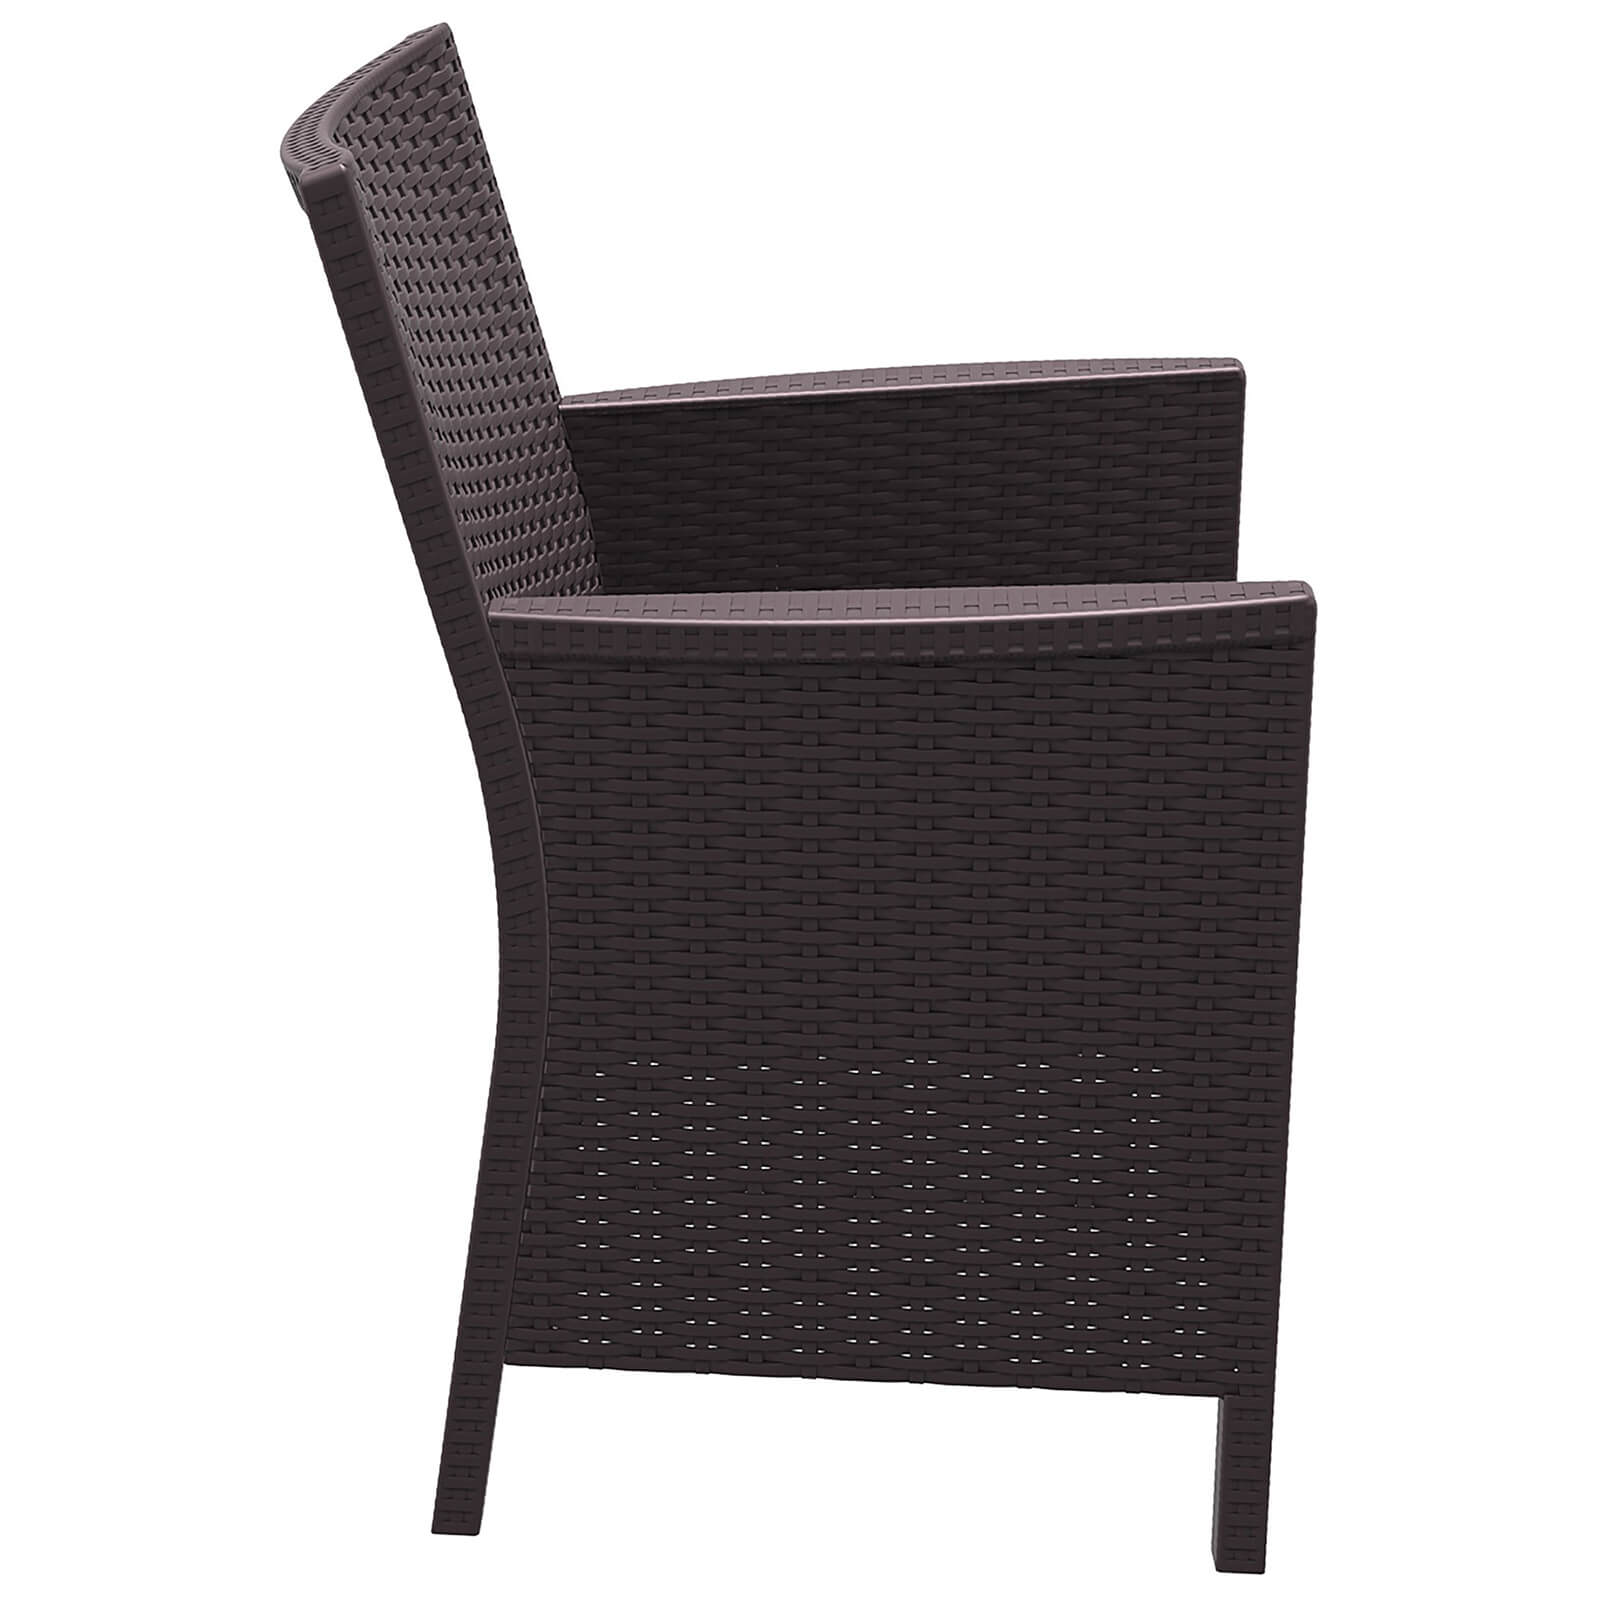 Napier | Resin Outdoor Dining Chairs With Arms | Chocolate